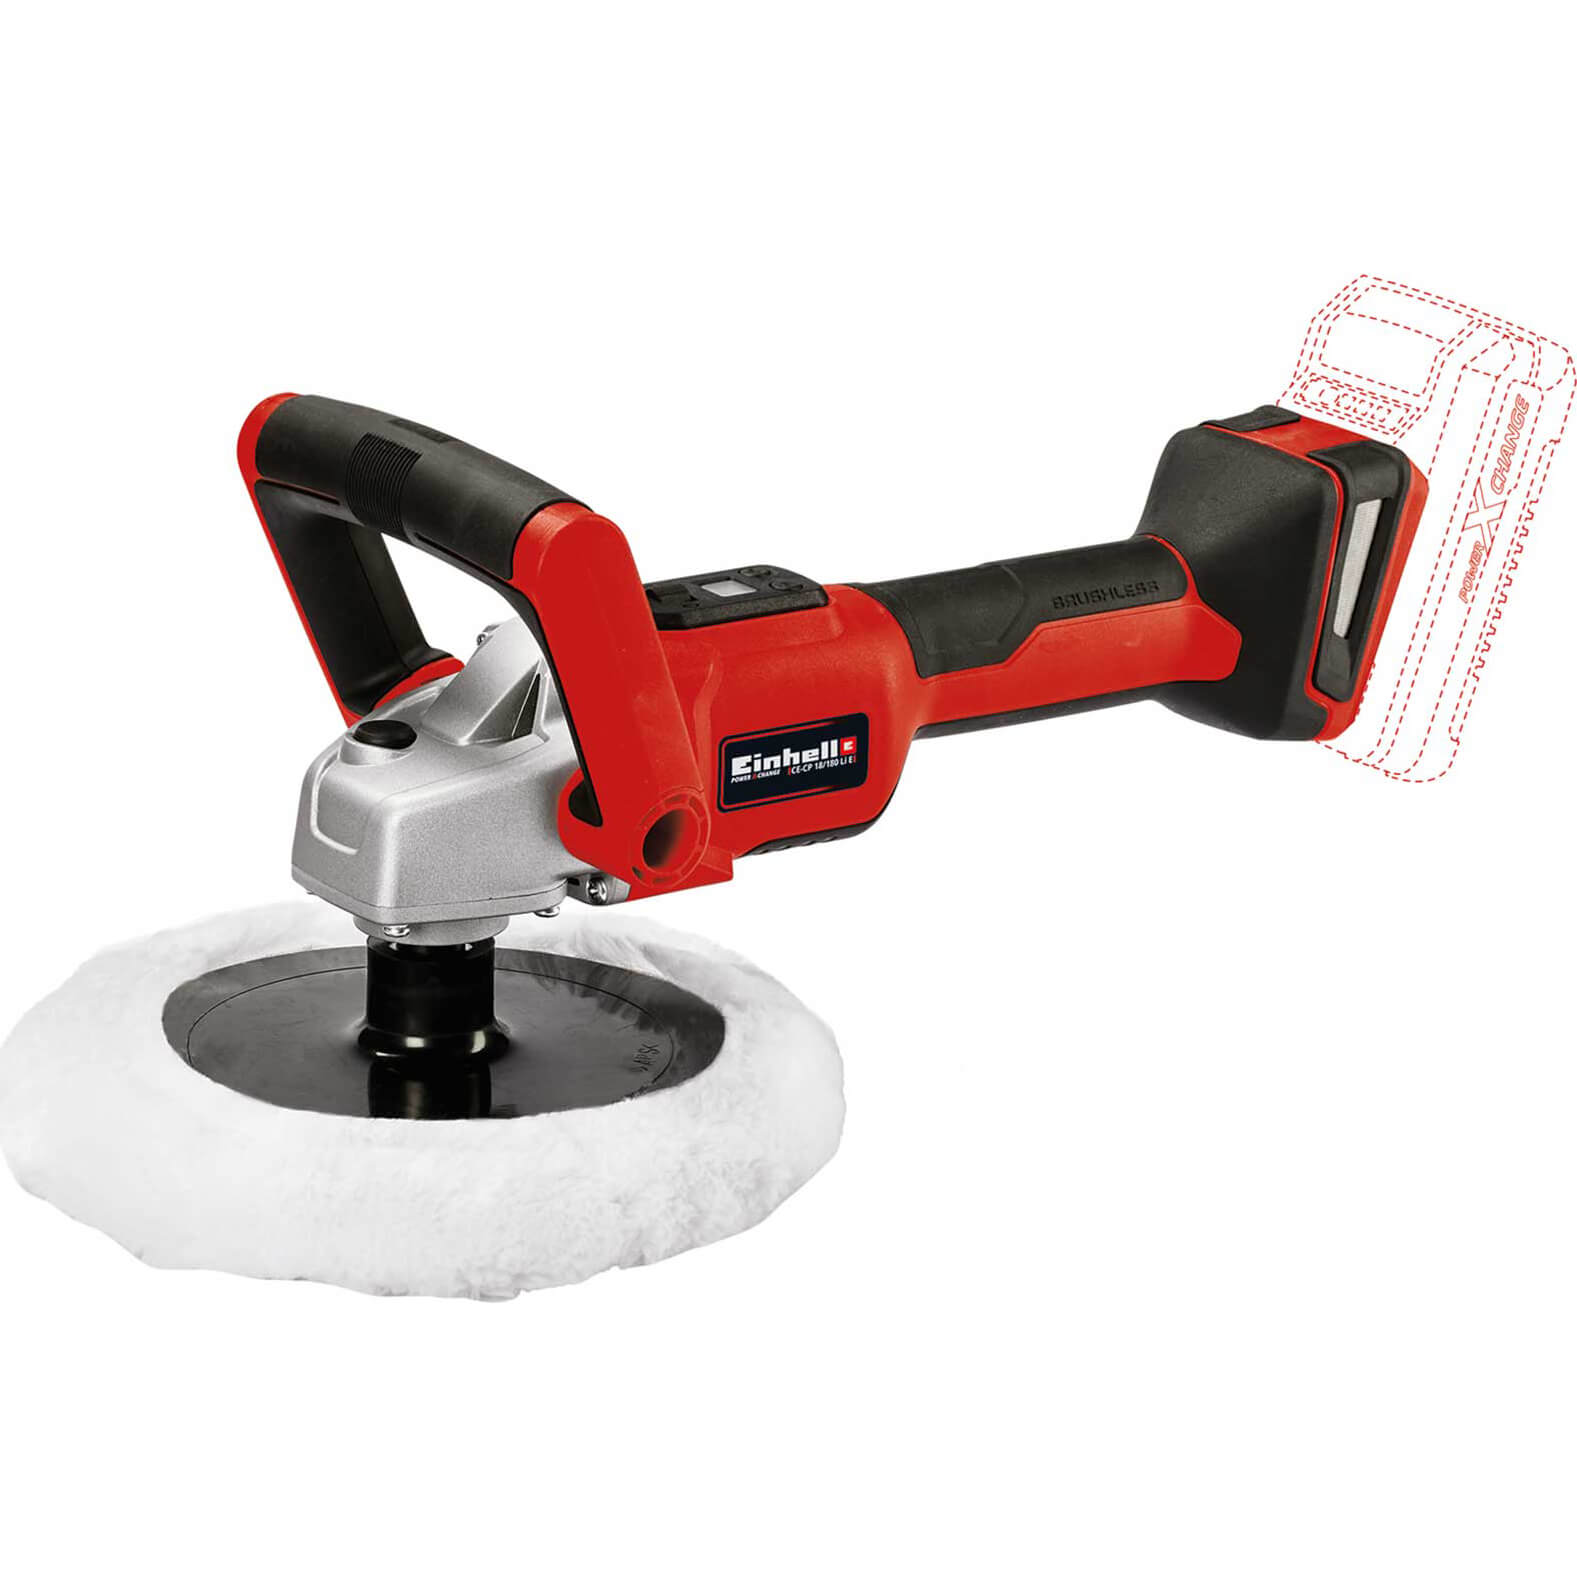 Image of Einhell CE-CP 18/180 Li 18v Cordless Polisher and Sander 180mm No Batteries No Charger No Case